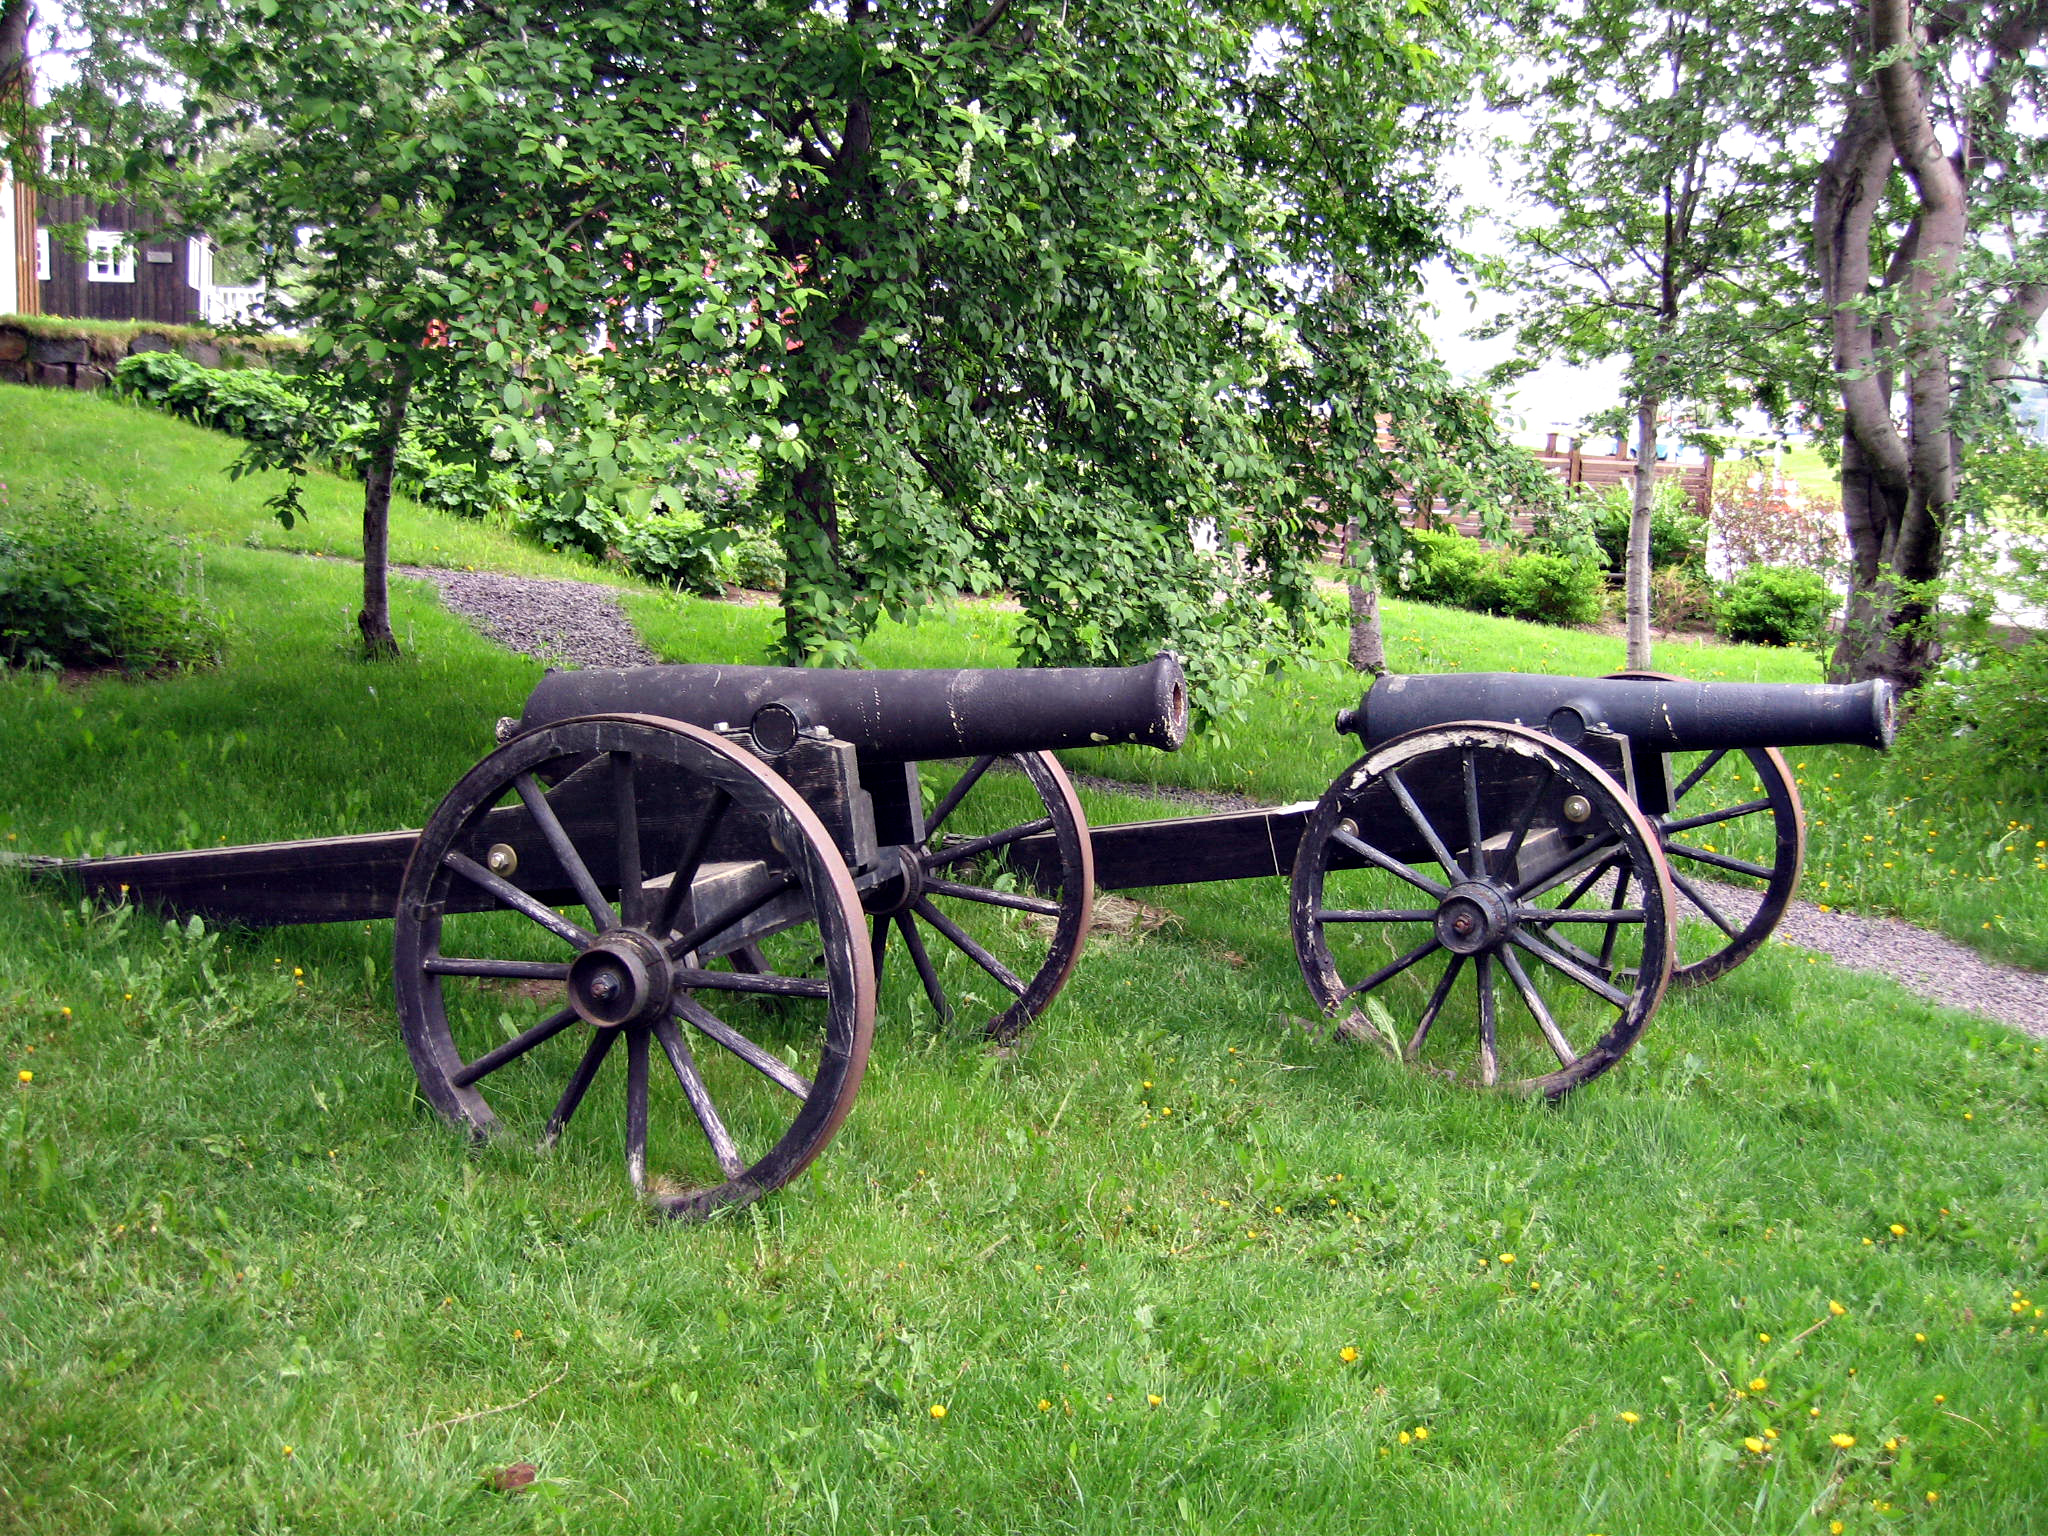 A small cast-iron cannon on a carriage photo